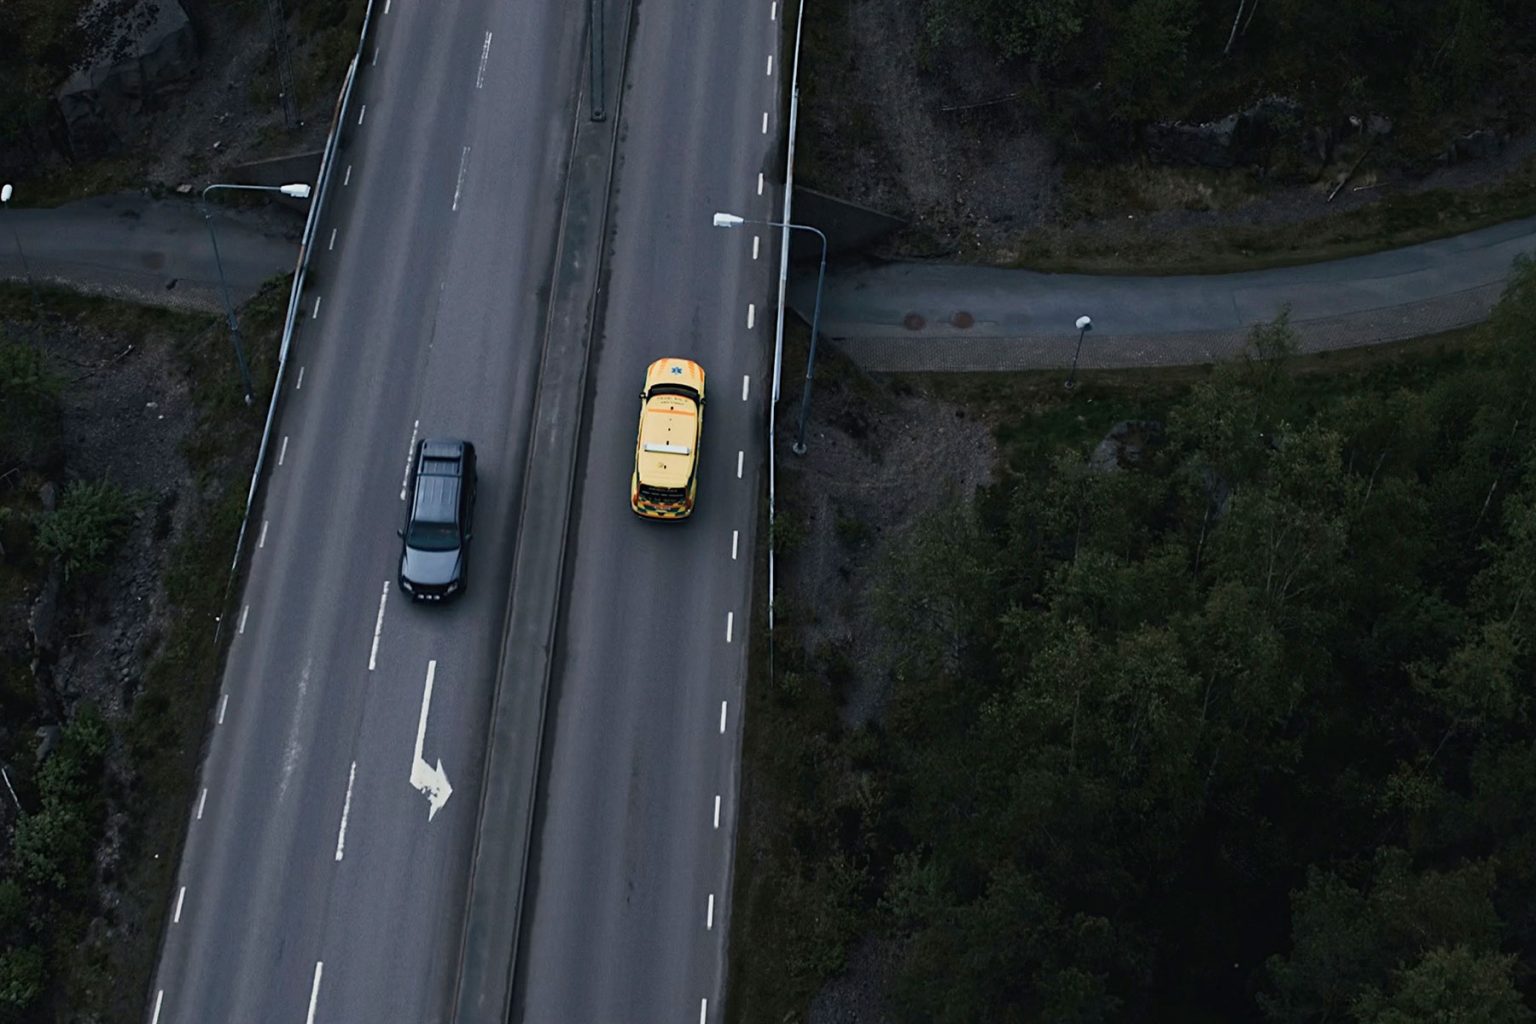 Page Image Aerial Motorway Shot Yellow Emergency Vehicle and Black Car Driving in Opposite Directions, Road and Underpass are Dark